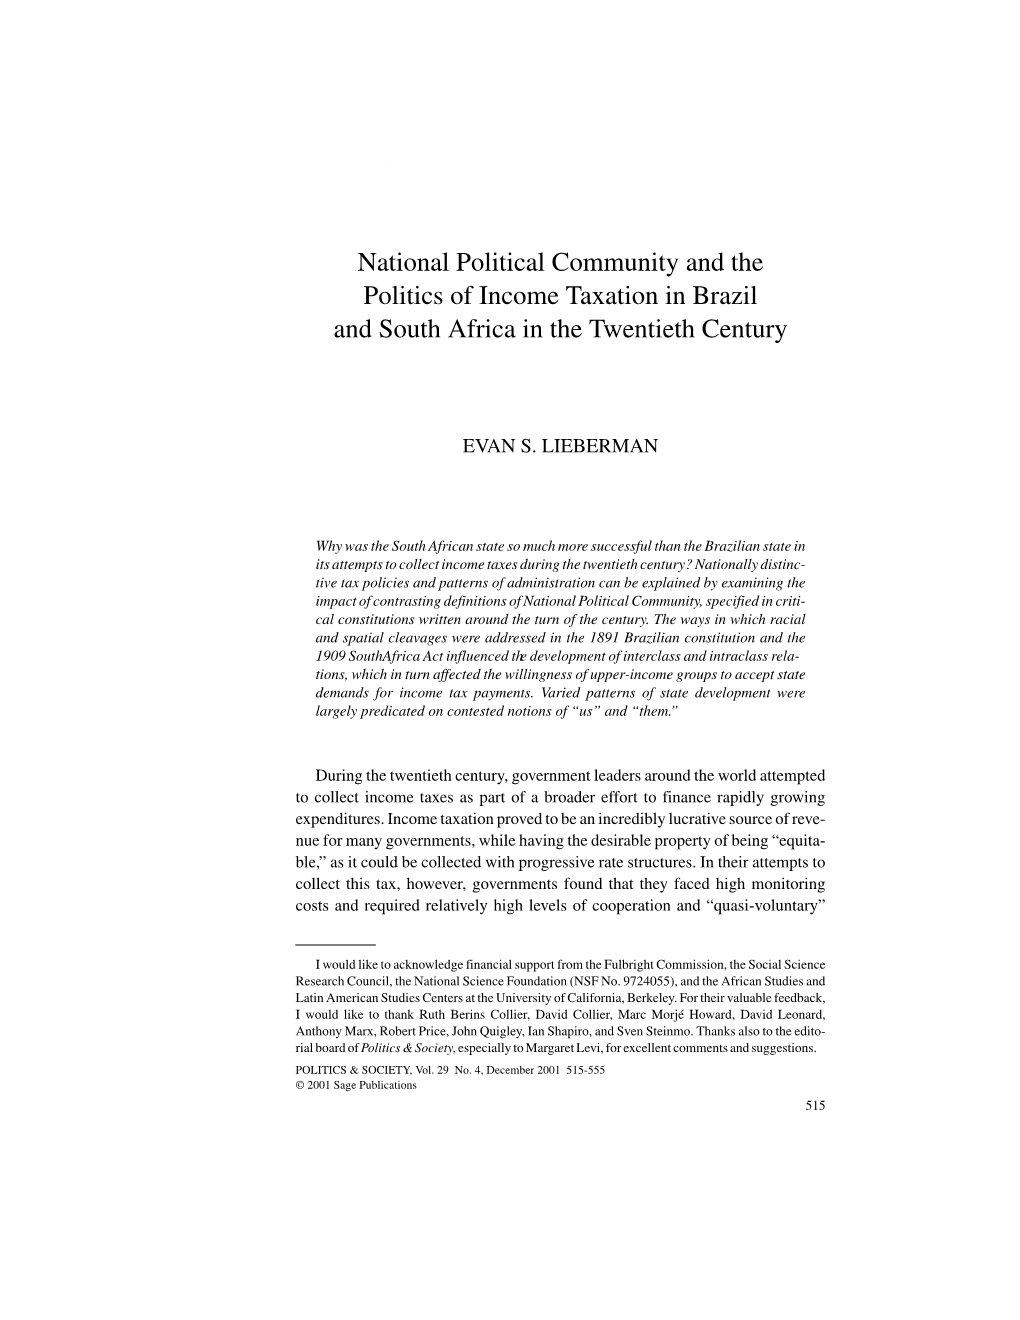 National Political Community and the Politics of Income Taxation in Brazil and South Africa in the Twentieth Century